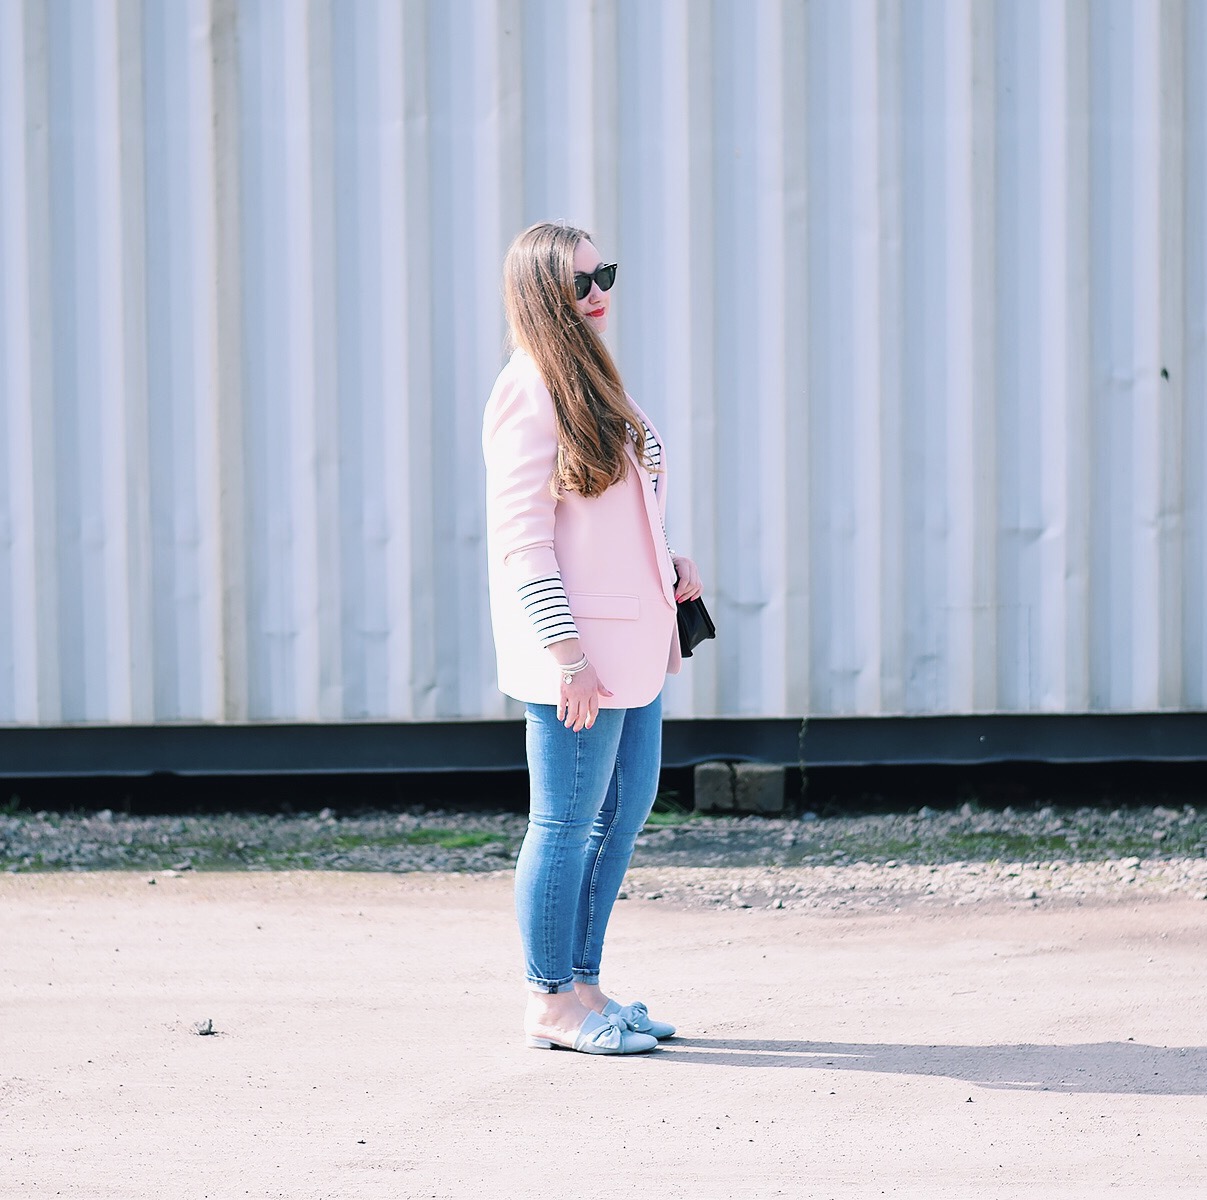 Pale pink jacket with jeans outfit